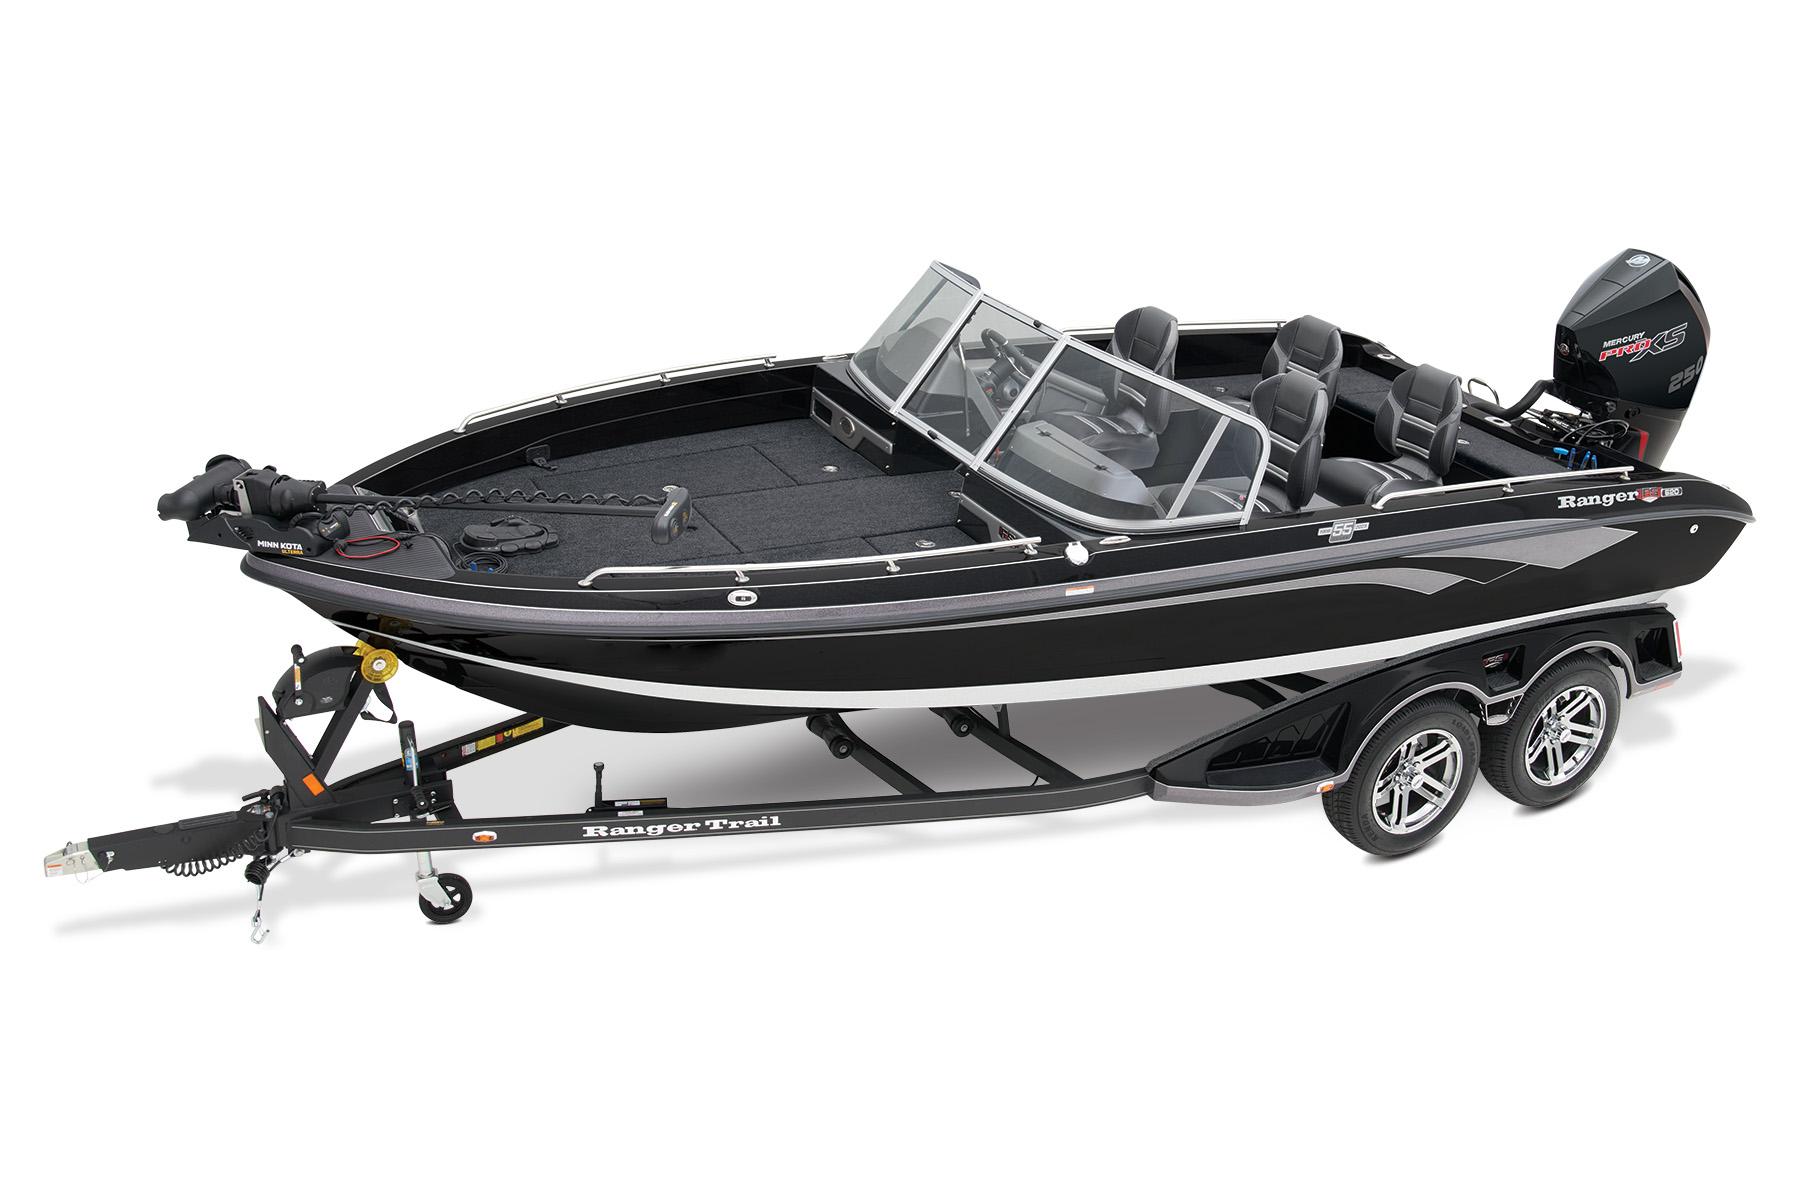 Manufacturer Provided Image: Ranger 620FS Ranger Cup Equipped